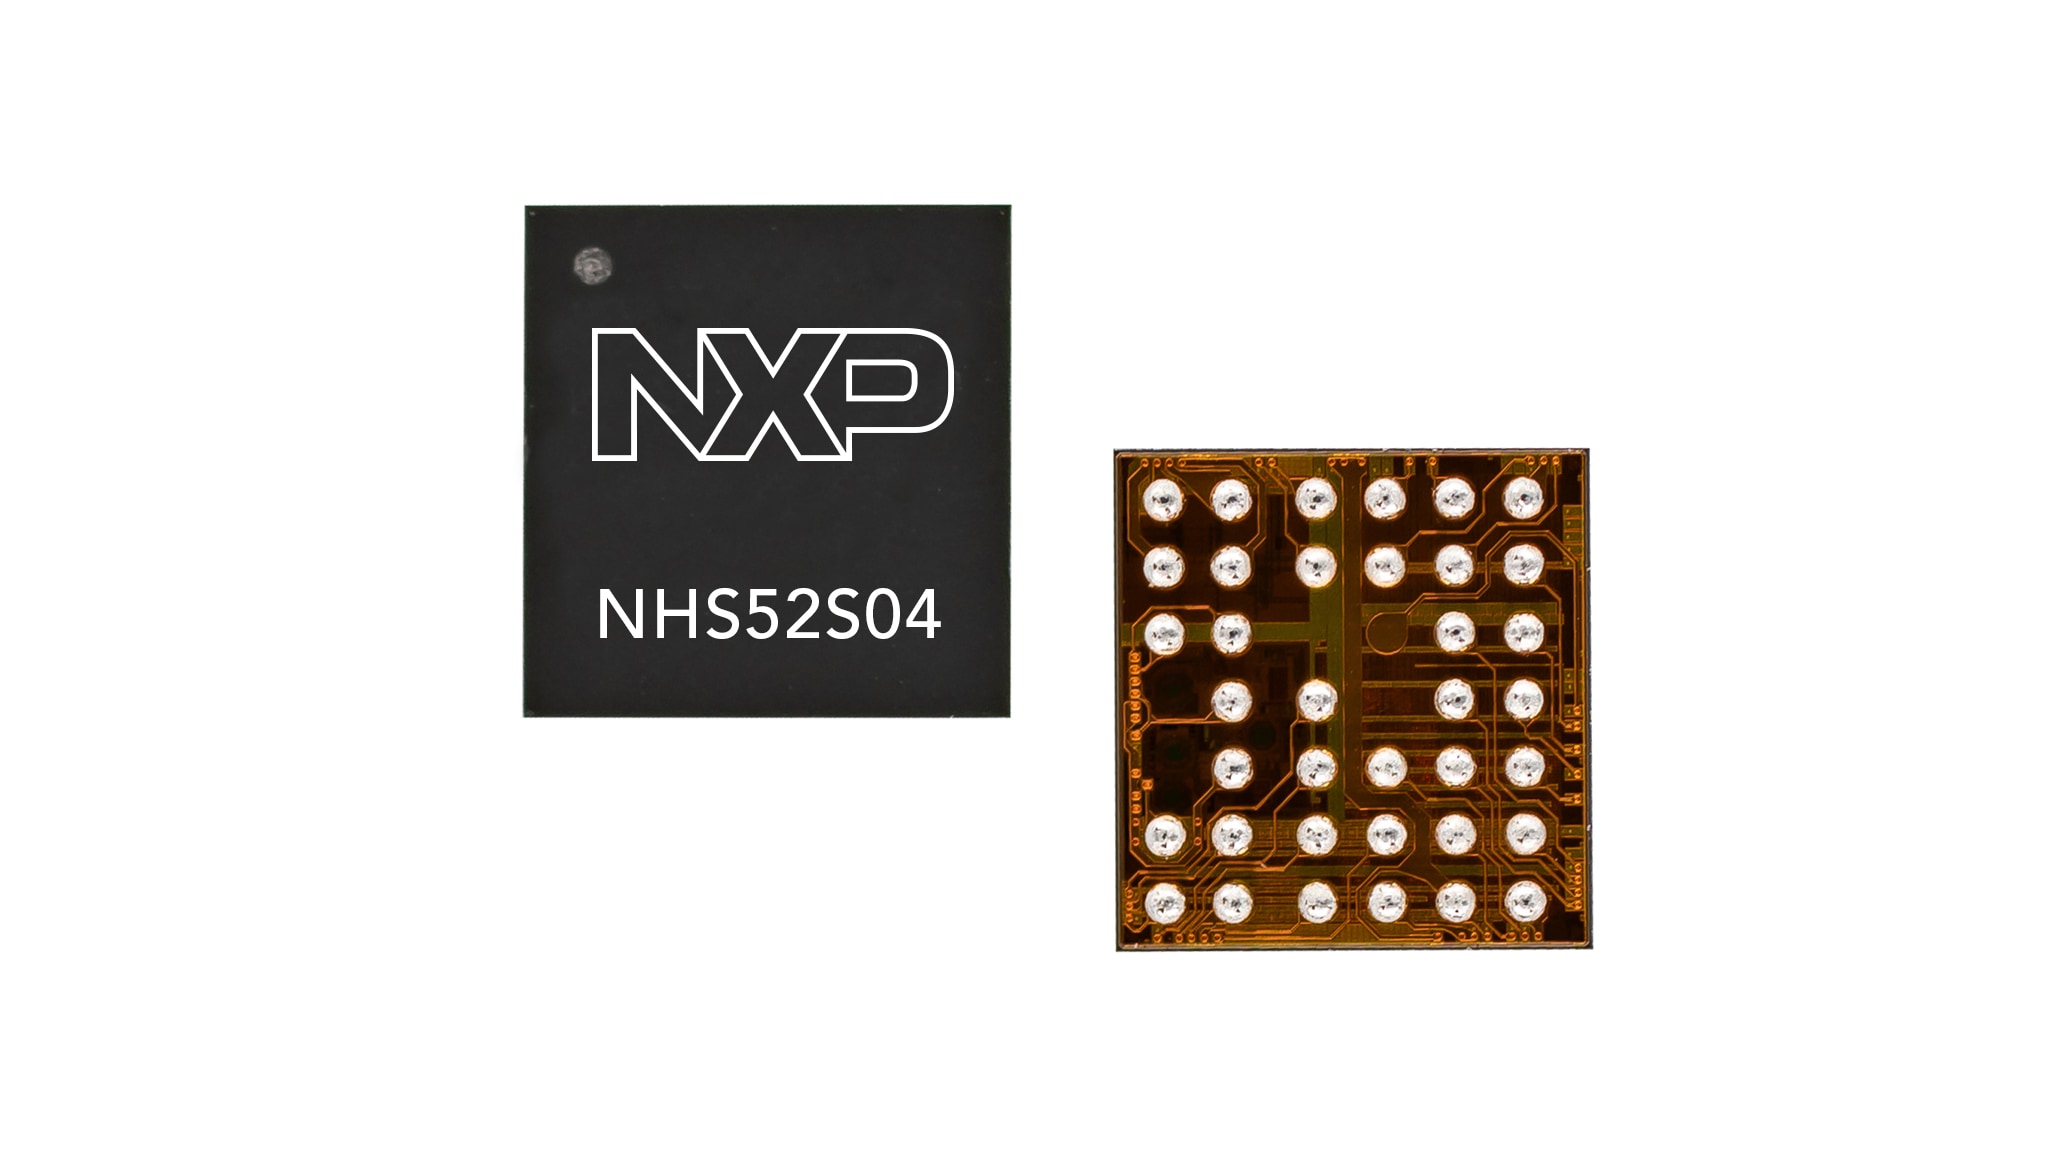 NHS52S04 Ultra-Low-Power SoC with BLE 5.3 | NXP Semiconductors